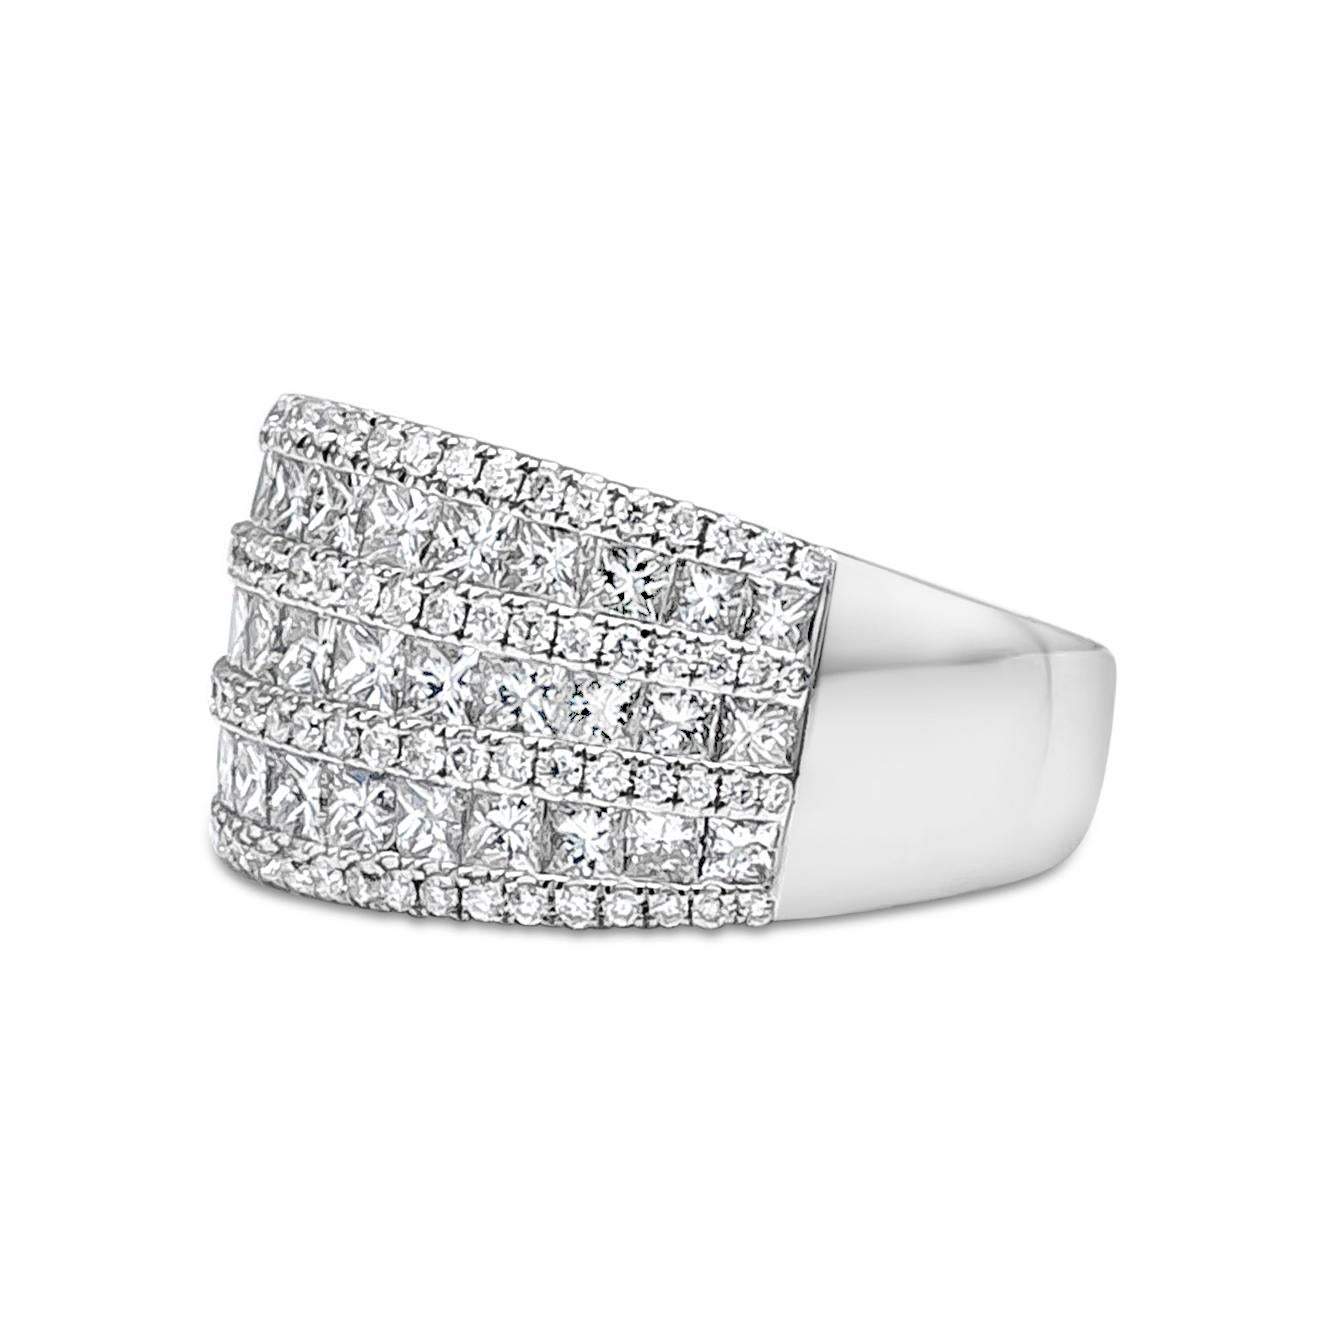 A timeless and fashionable wide triple rows fashion ring showcasing 94 brilliant round diamonds that elegantly graduating and designed with three rows of 39 princess cut diamonds. Brilliant round diamonds weigh 0.46 carats total, F Color and VS-SI